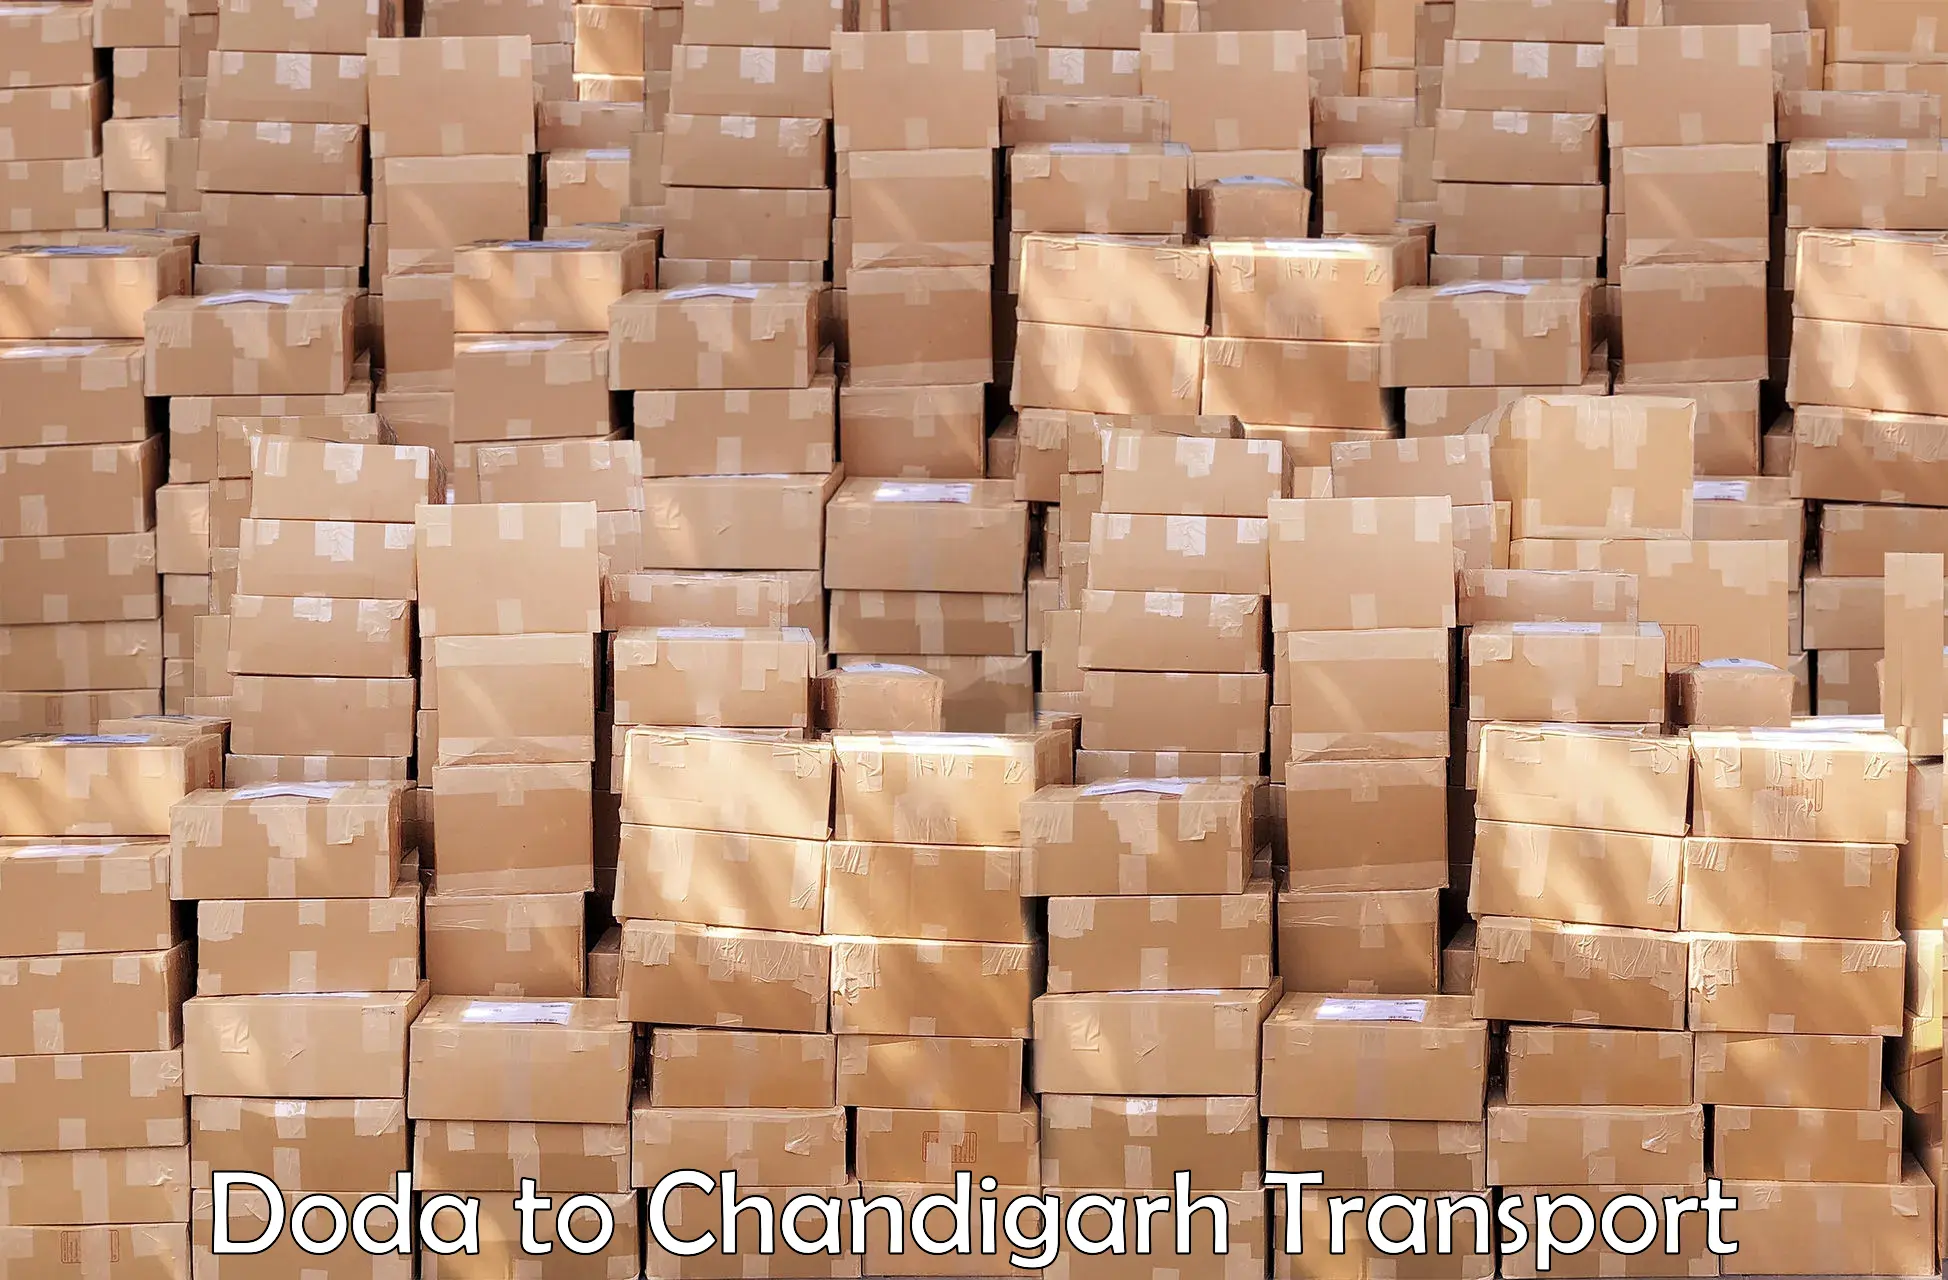 Commercial transport service Doda to Chandigarh